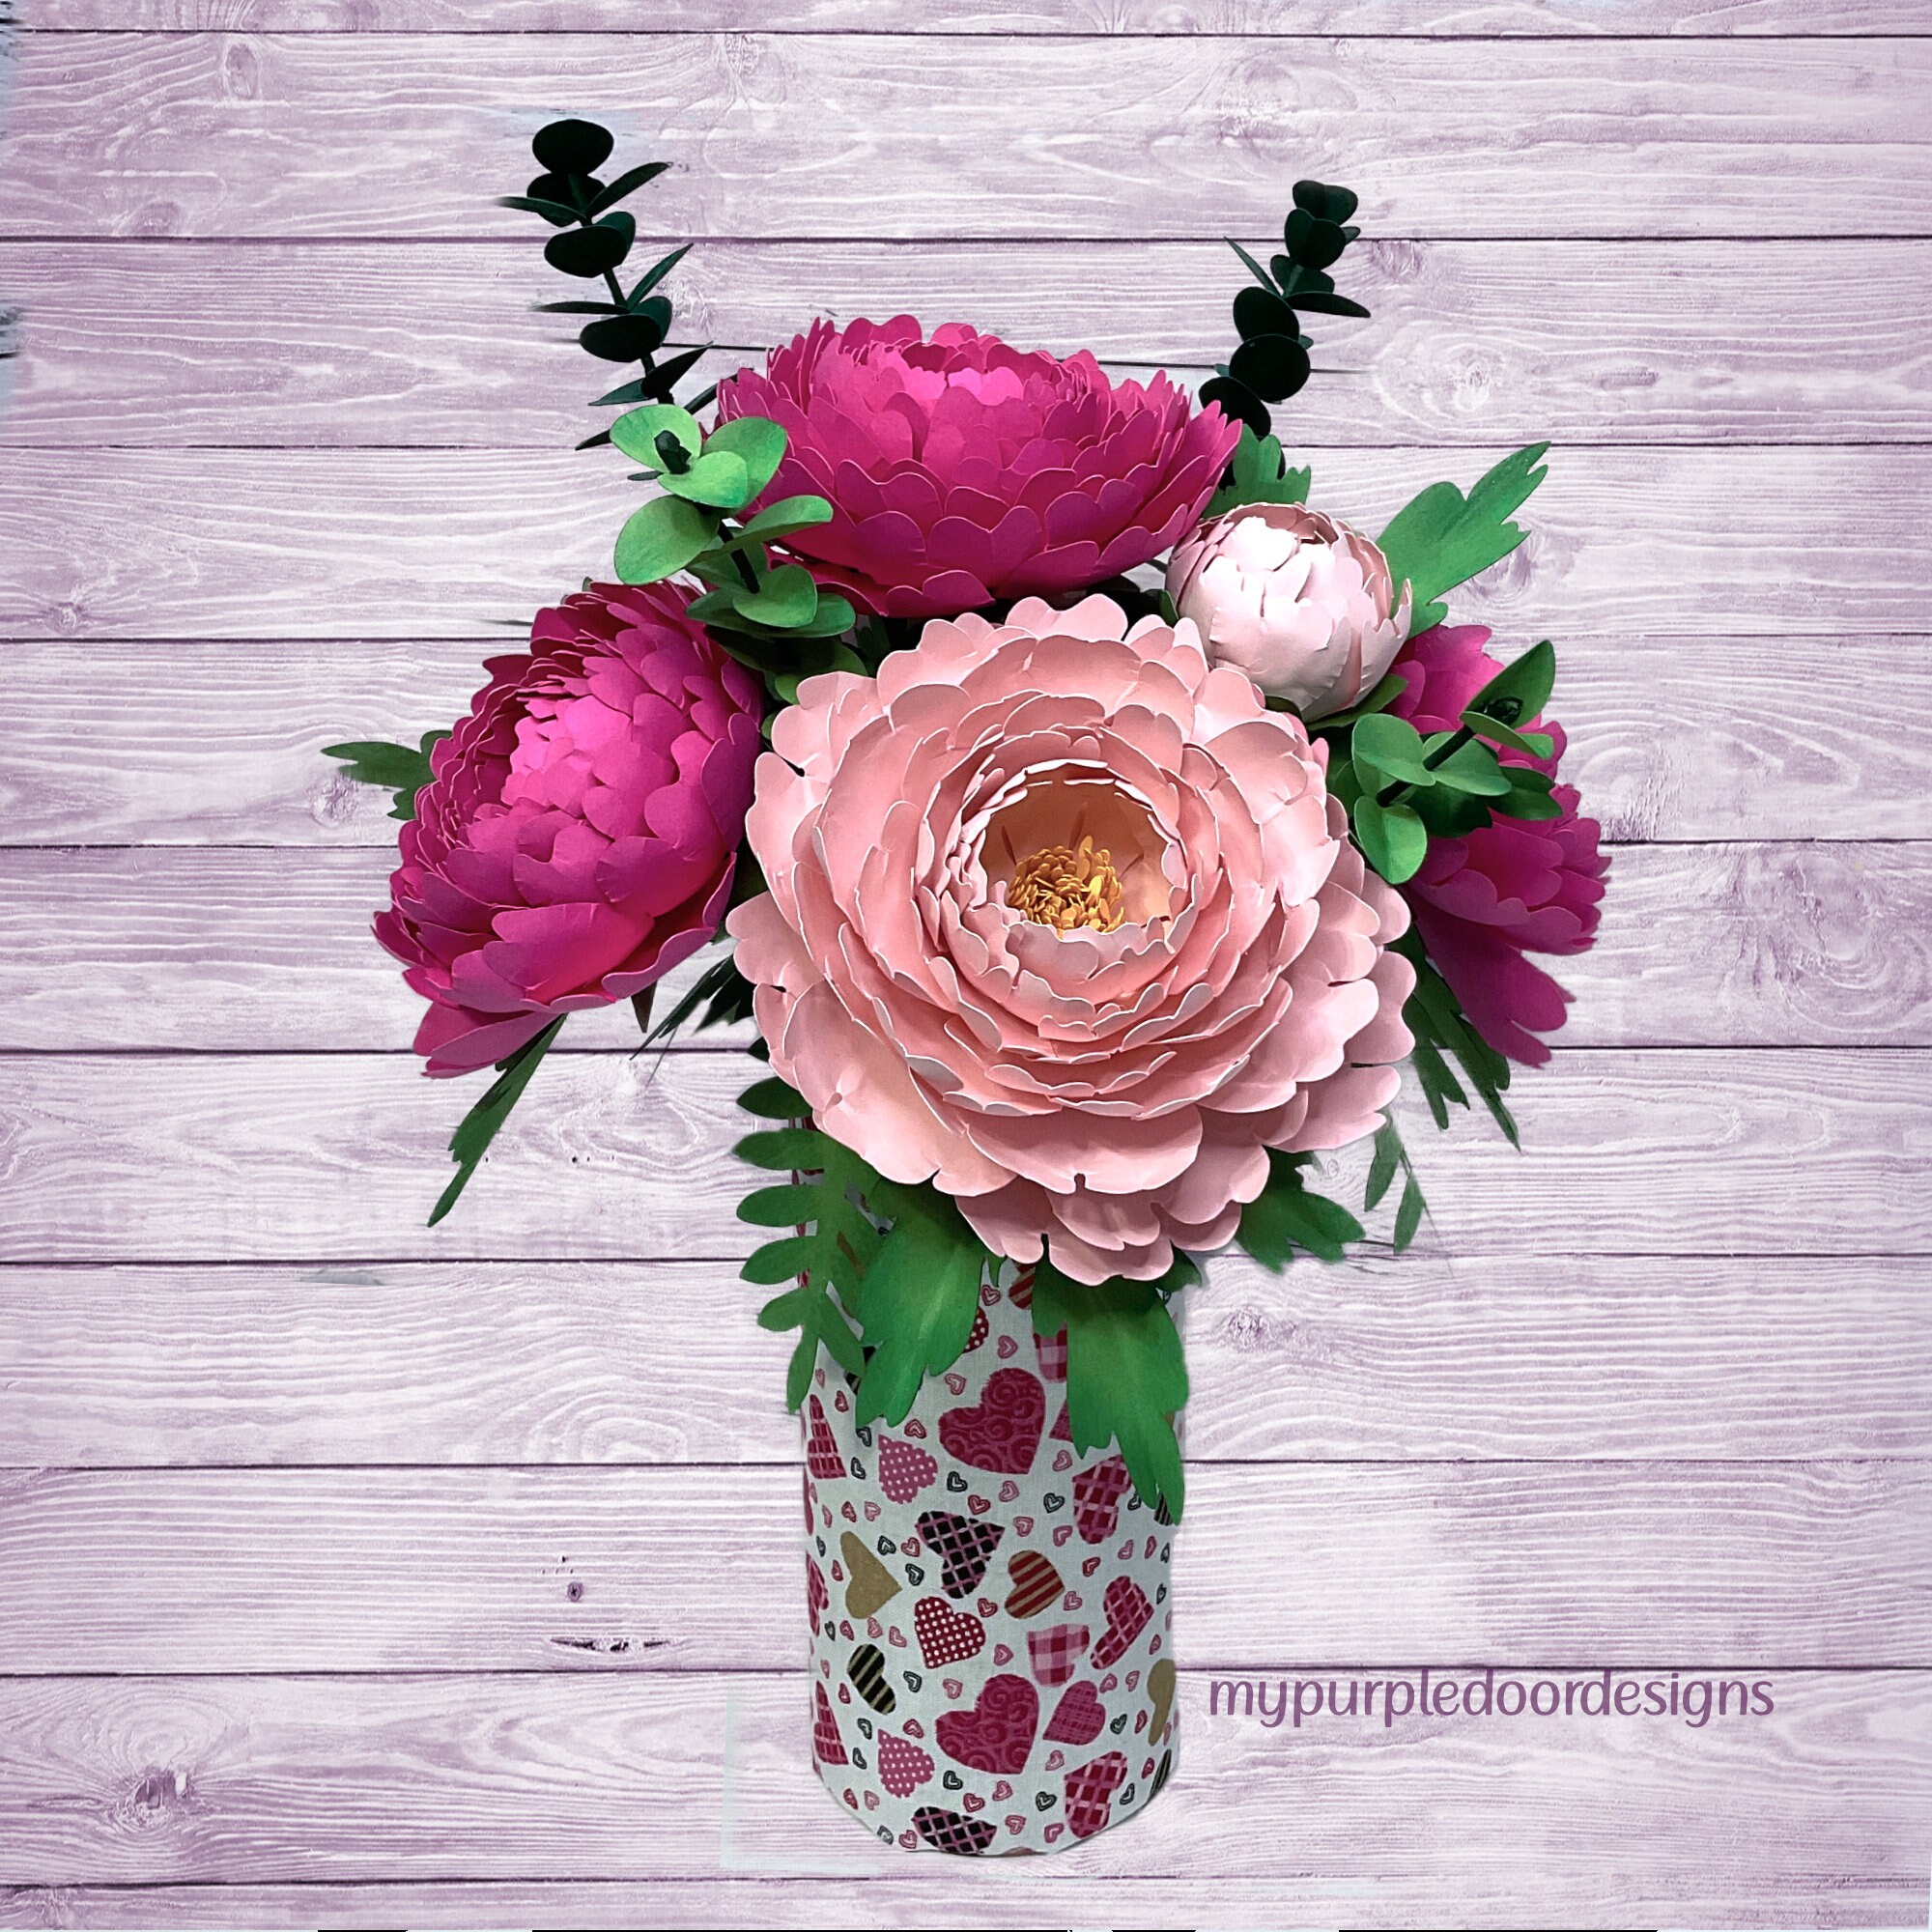 Heart-Shaped Peony Accent Faux Floral Wreath